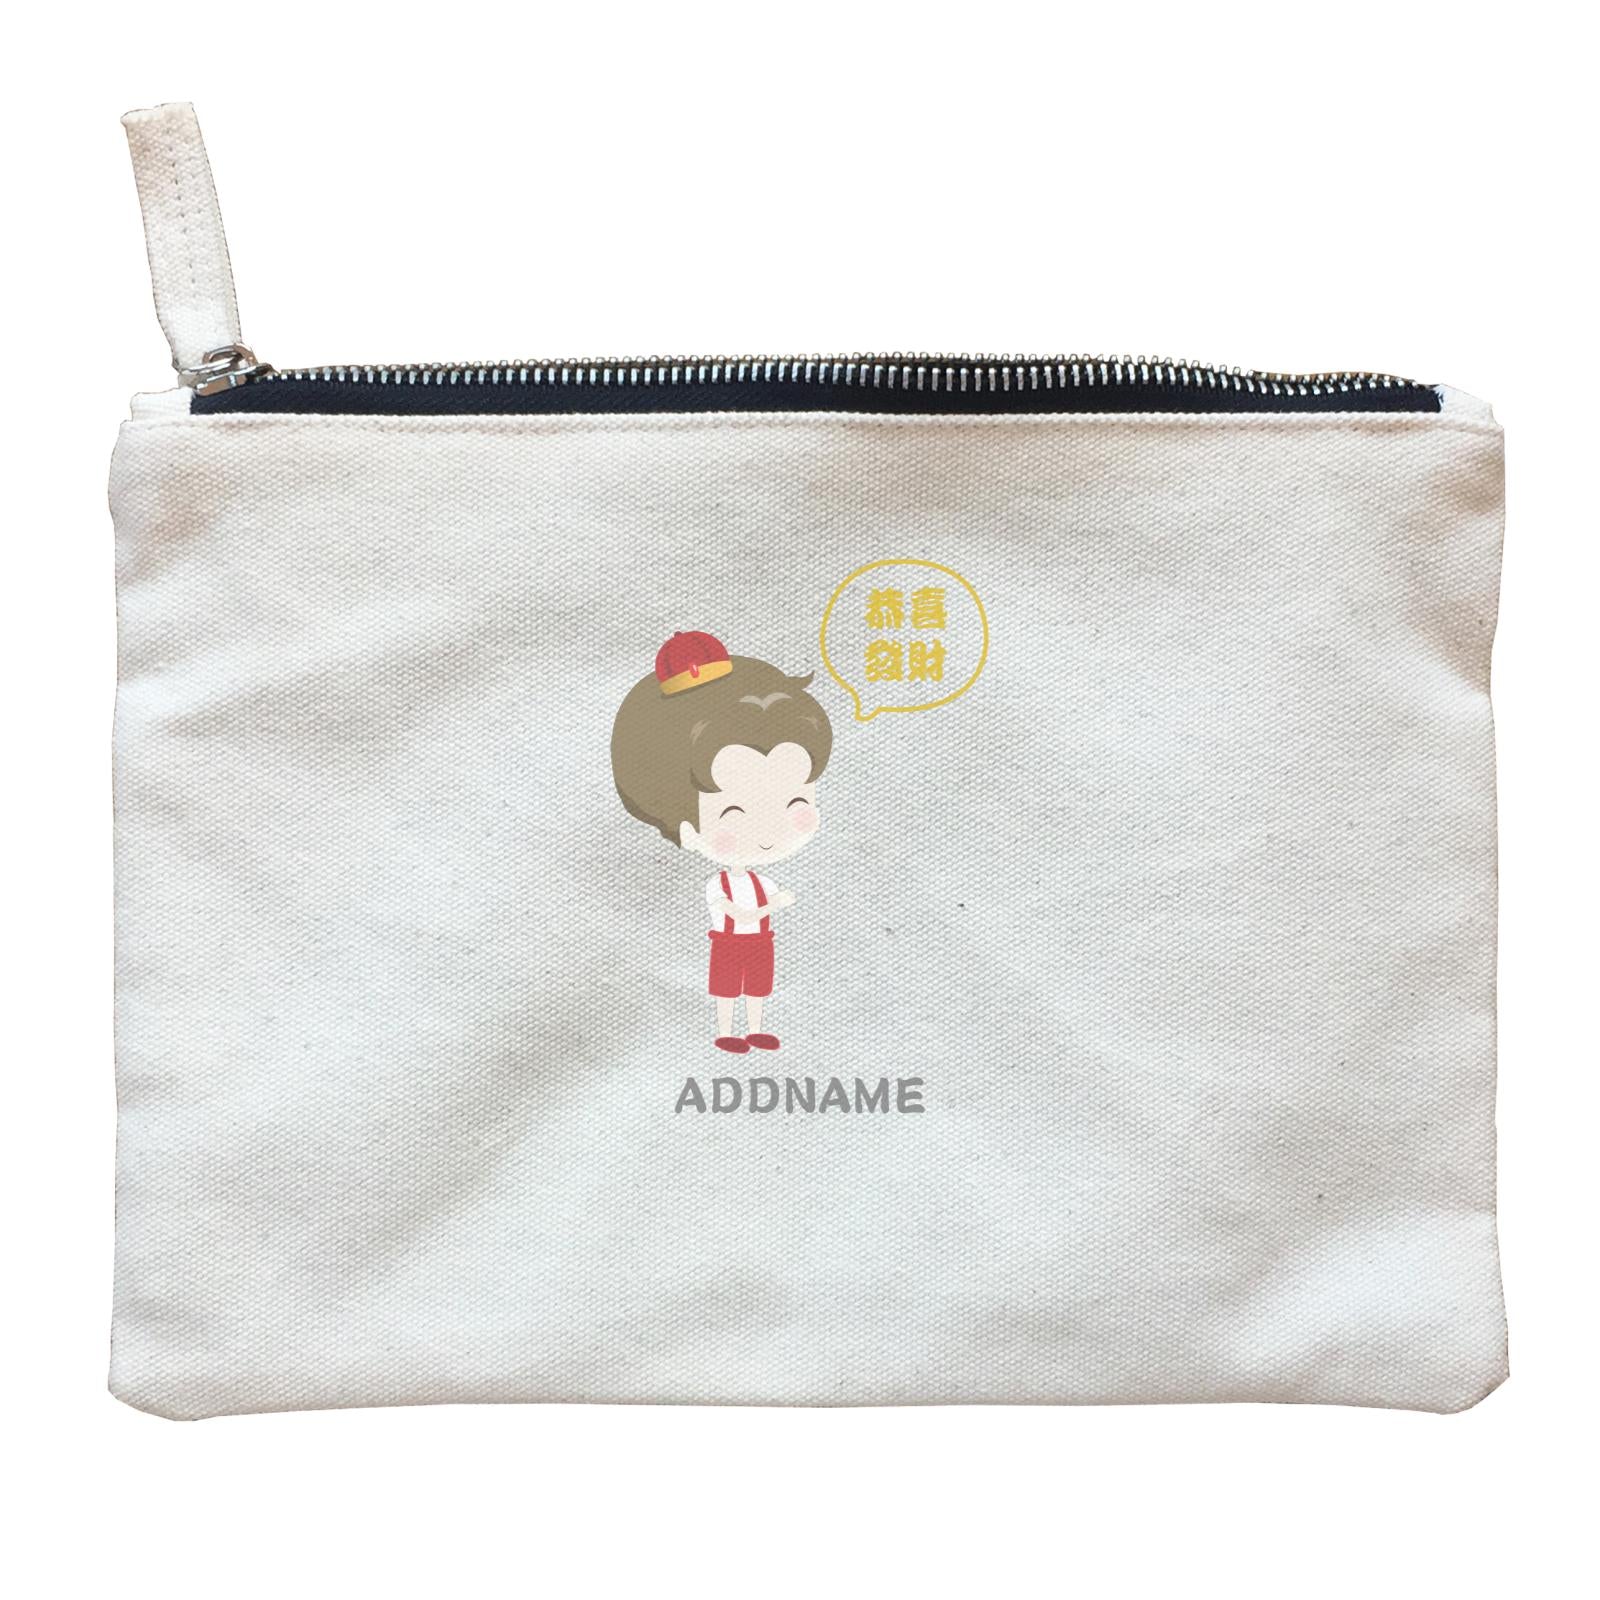 Chinese New Year Family Gong Xi Fai Cai Boy Addname Zipper Pouch